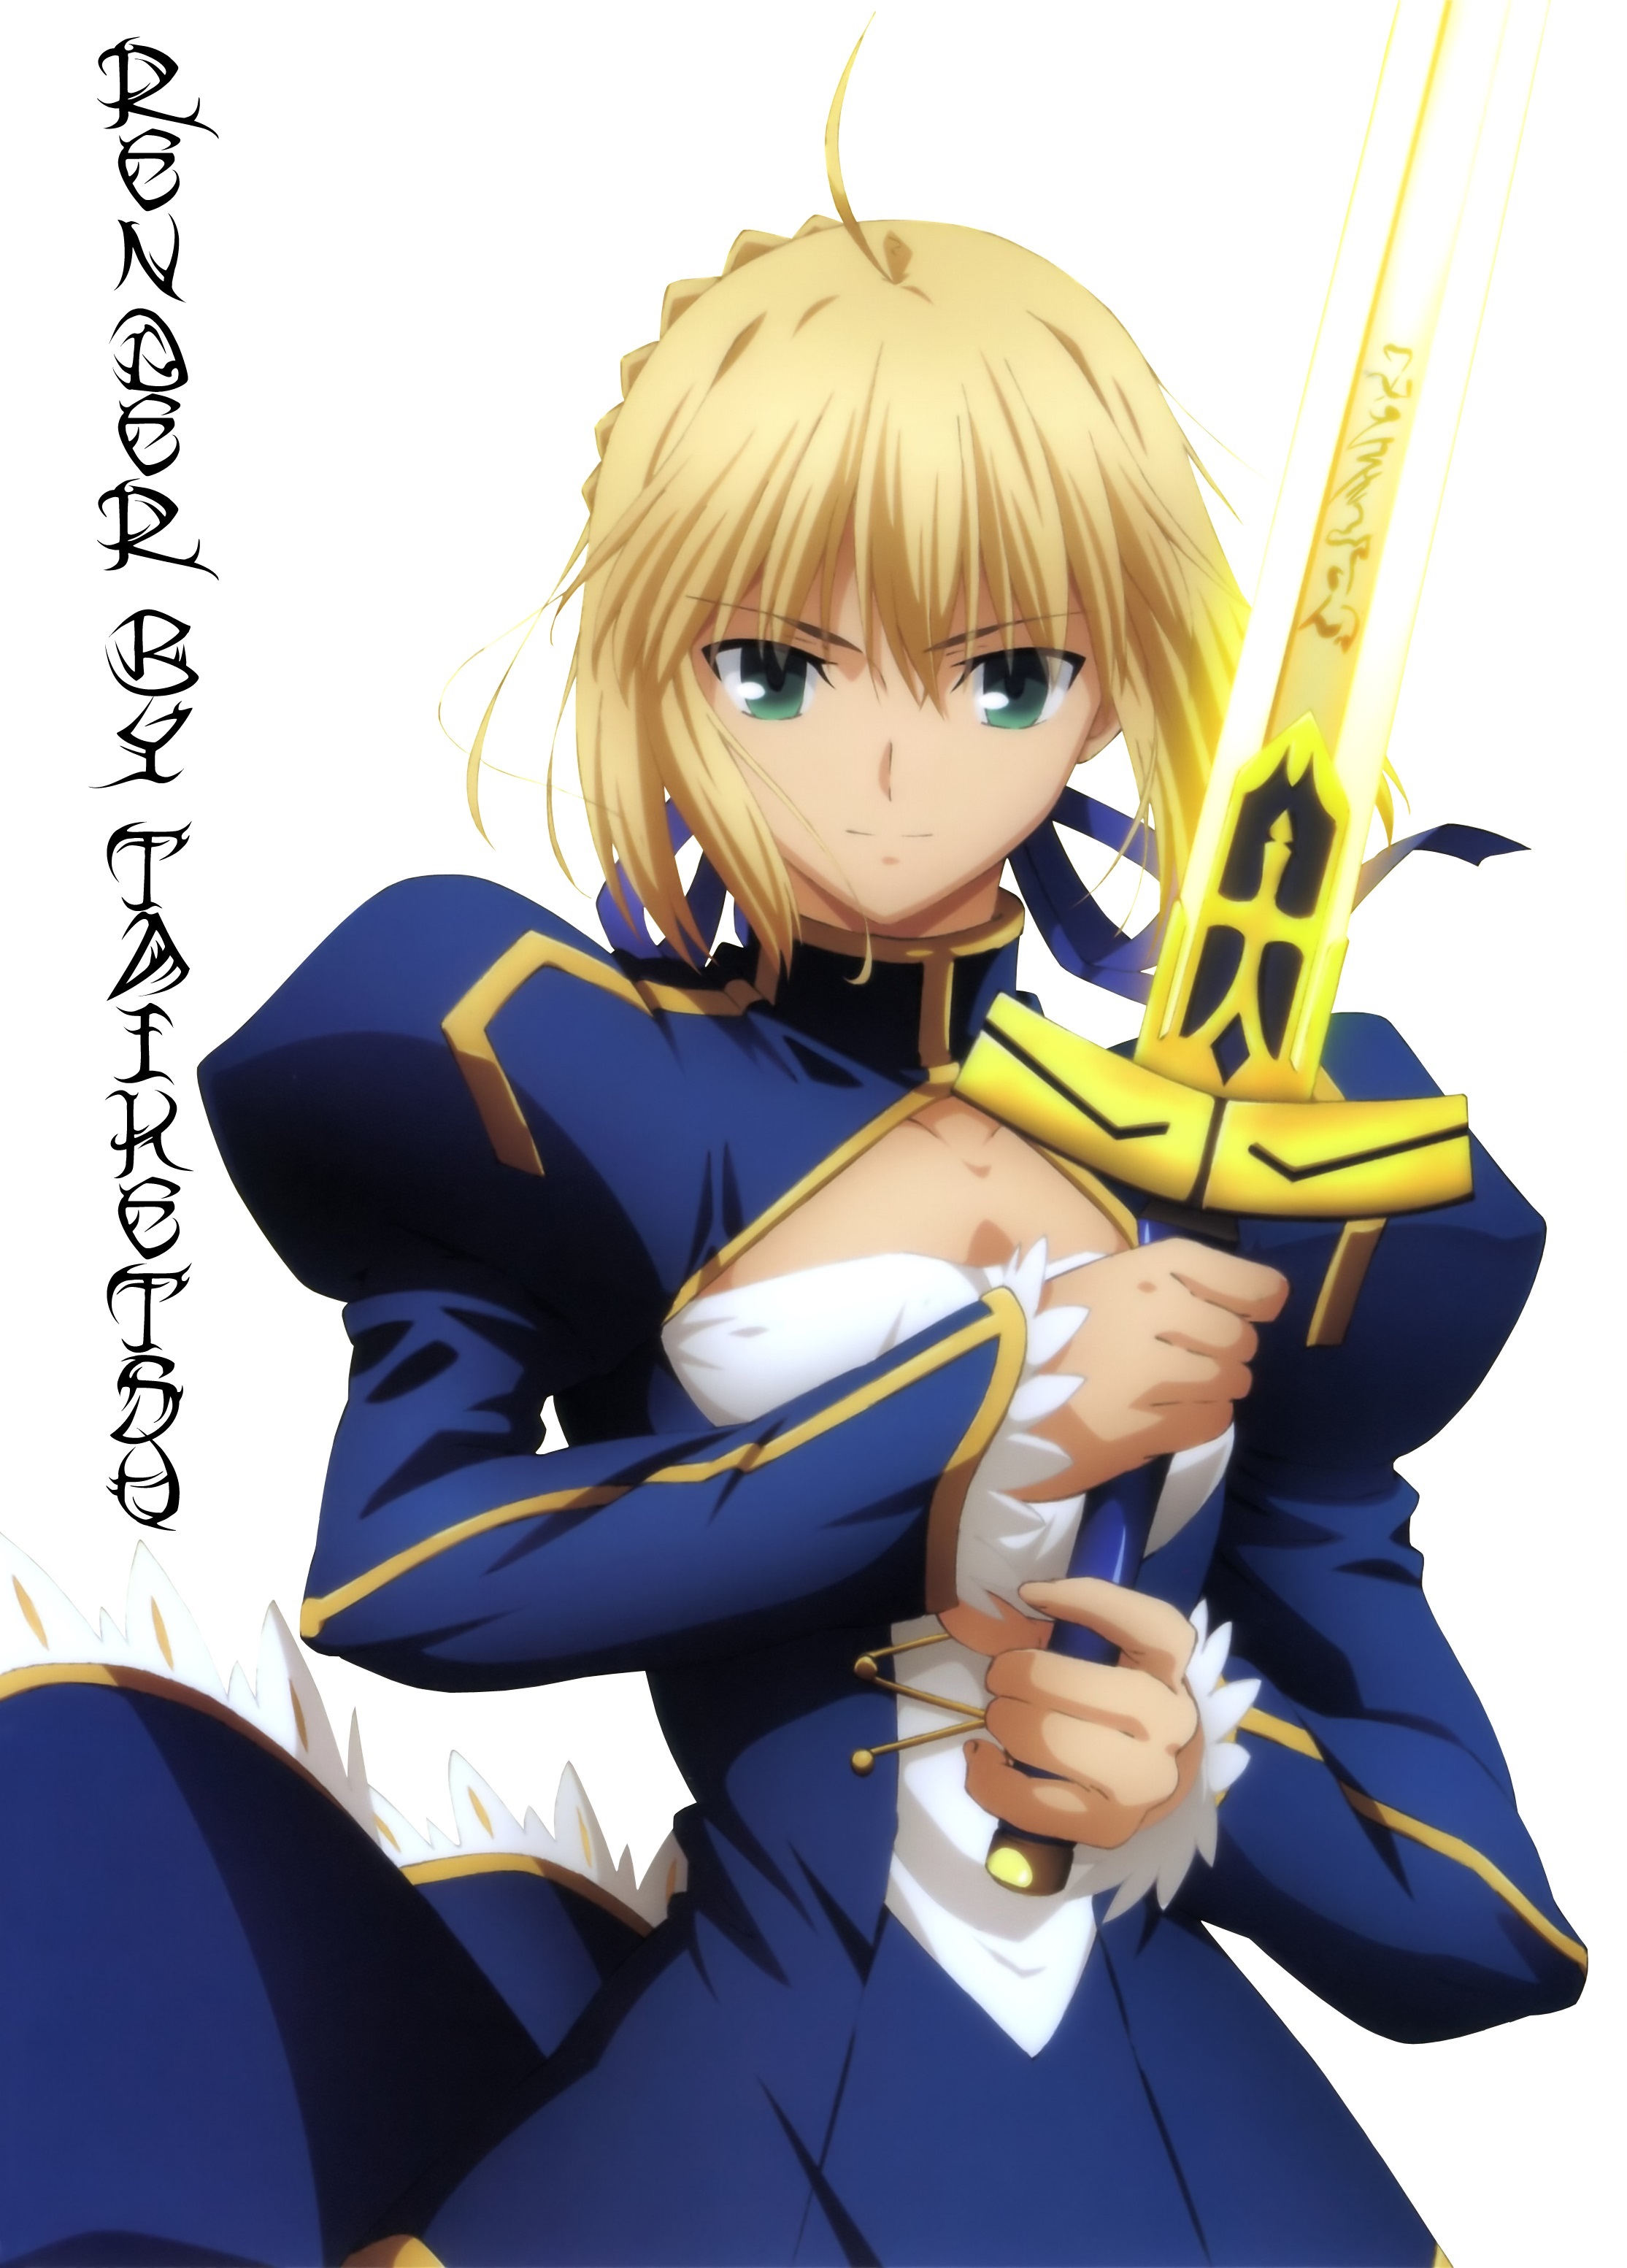 Saber Anime Wallpapers - Wallpaper Cave